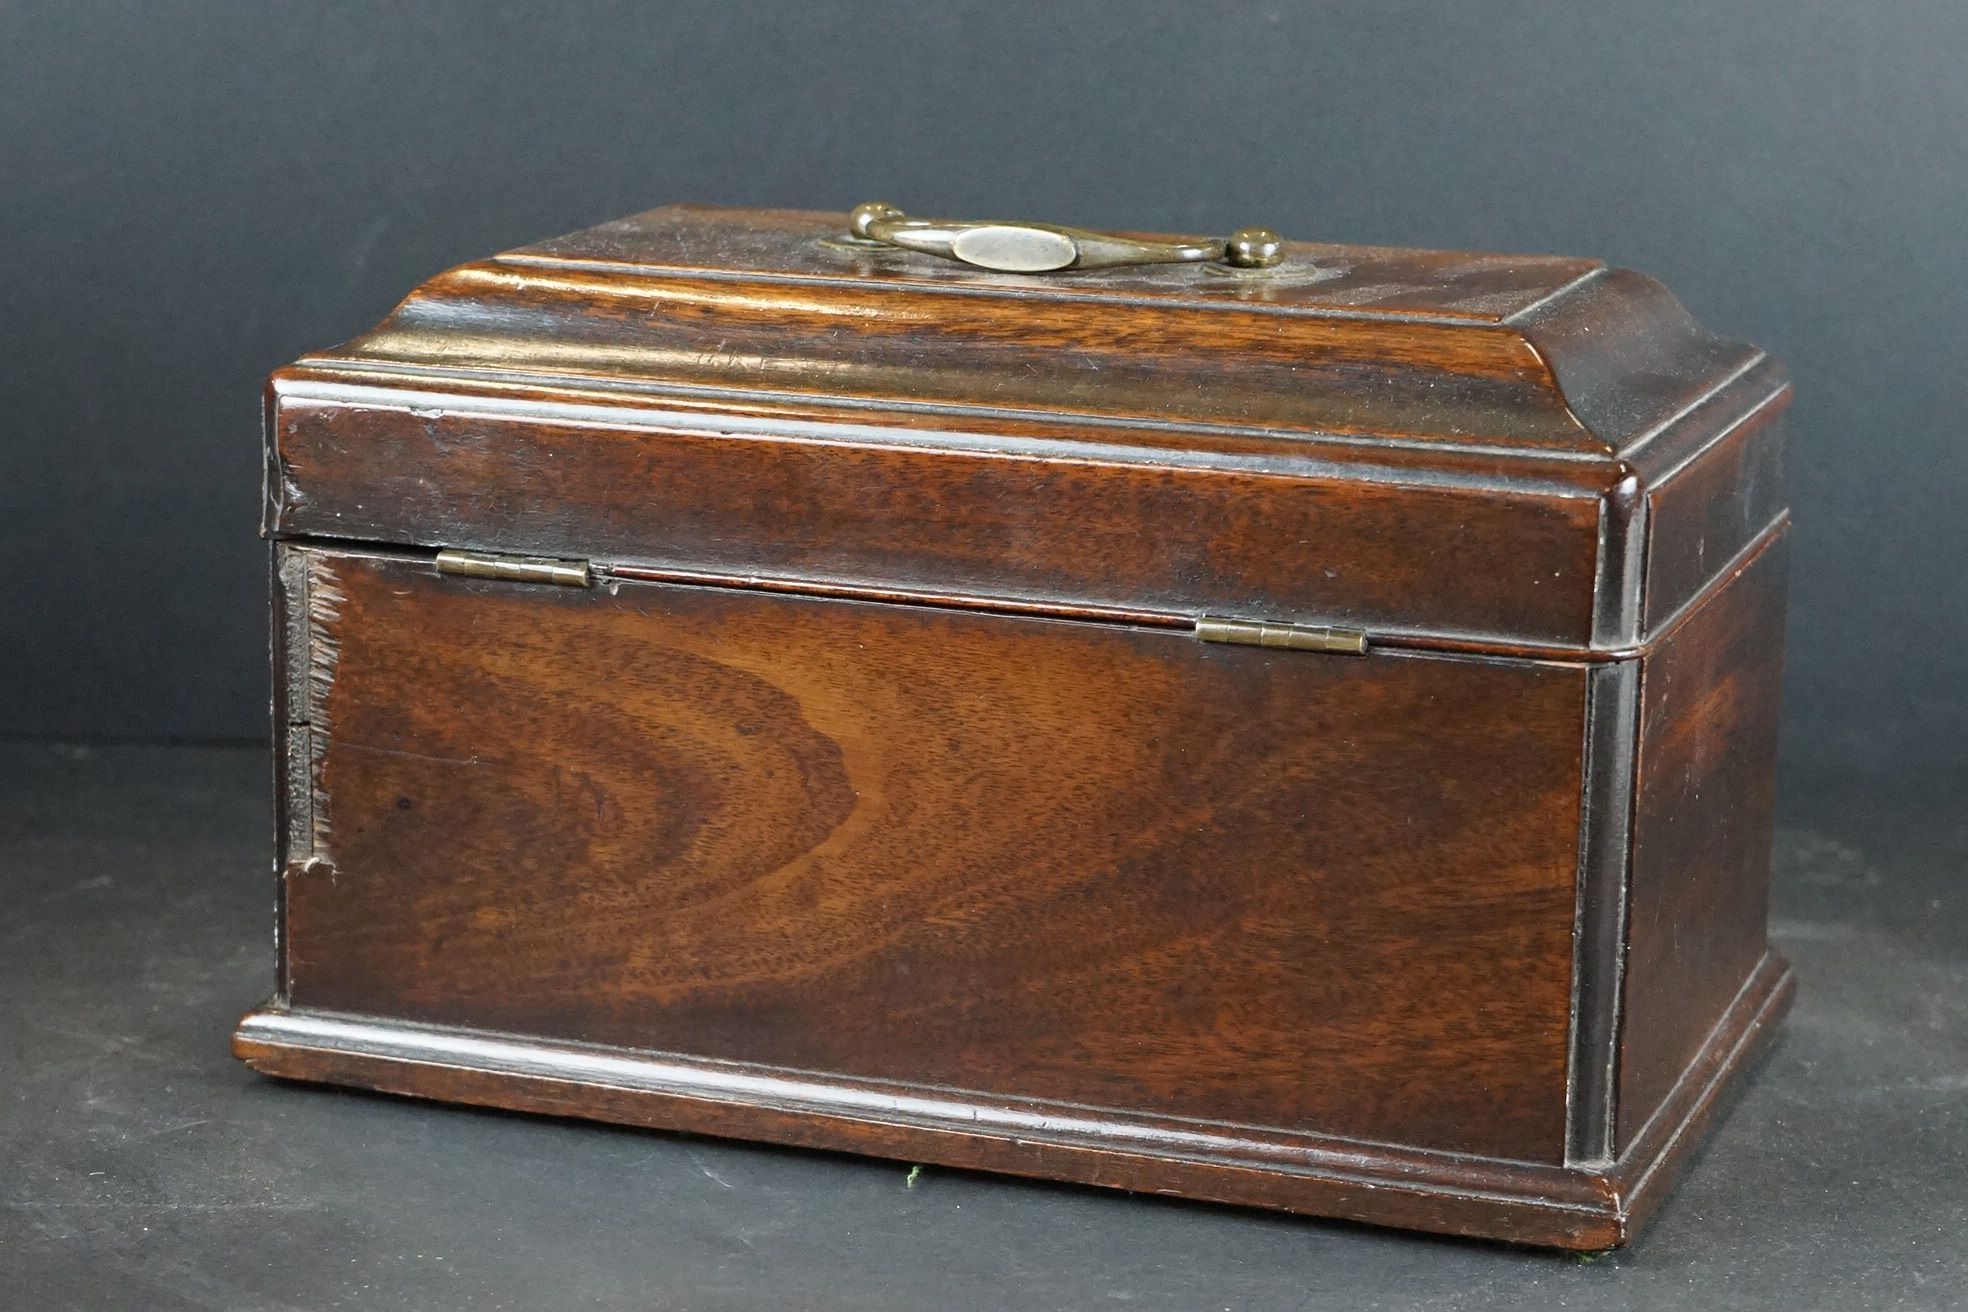 An antique wooden lidded box with brass fittings - Image 6 of 7